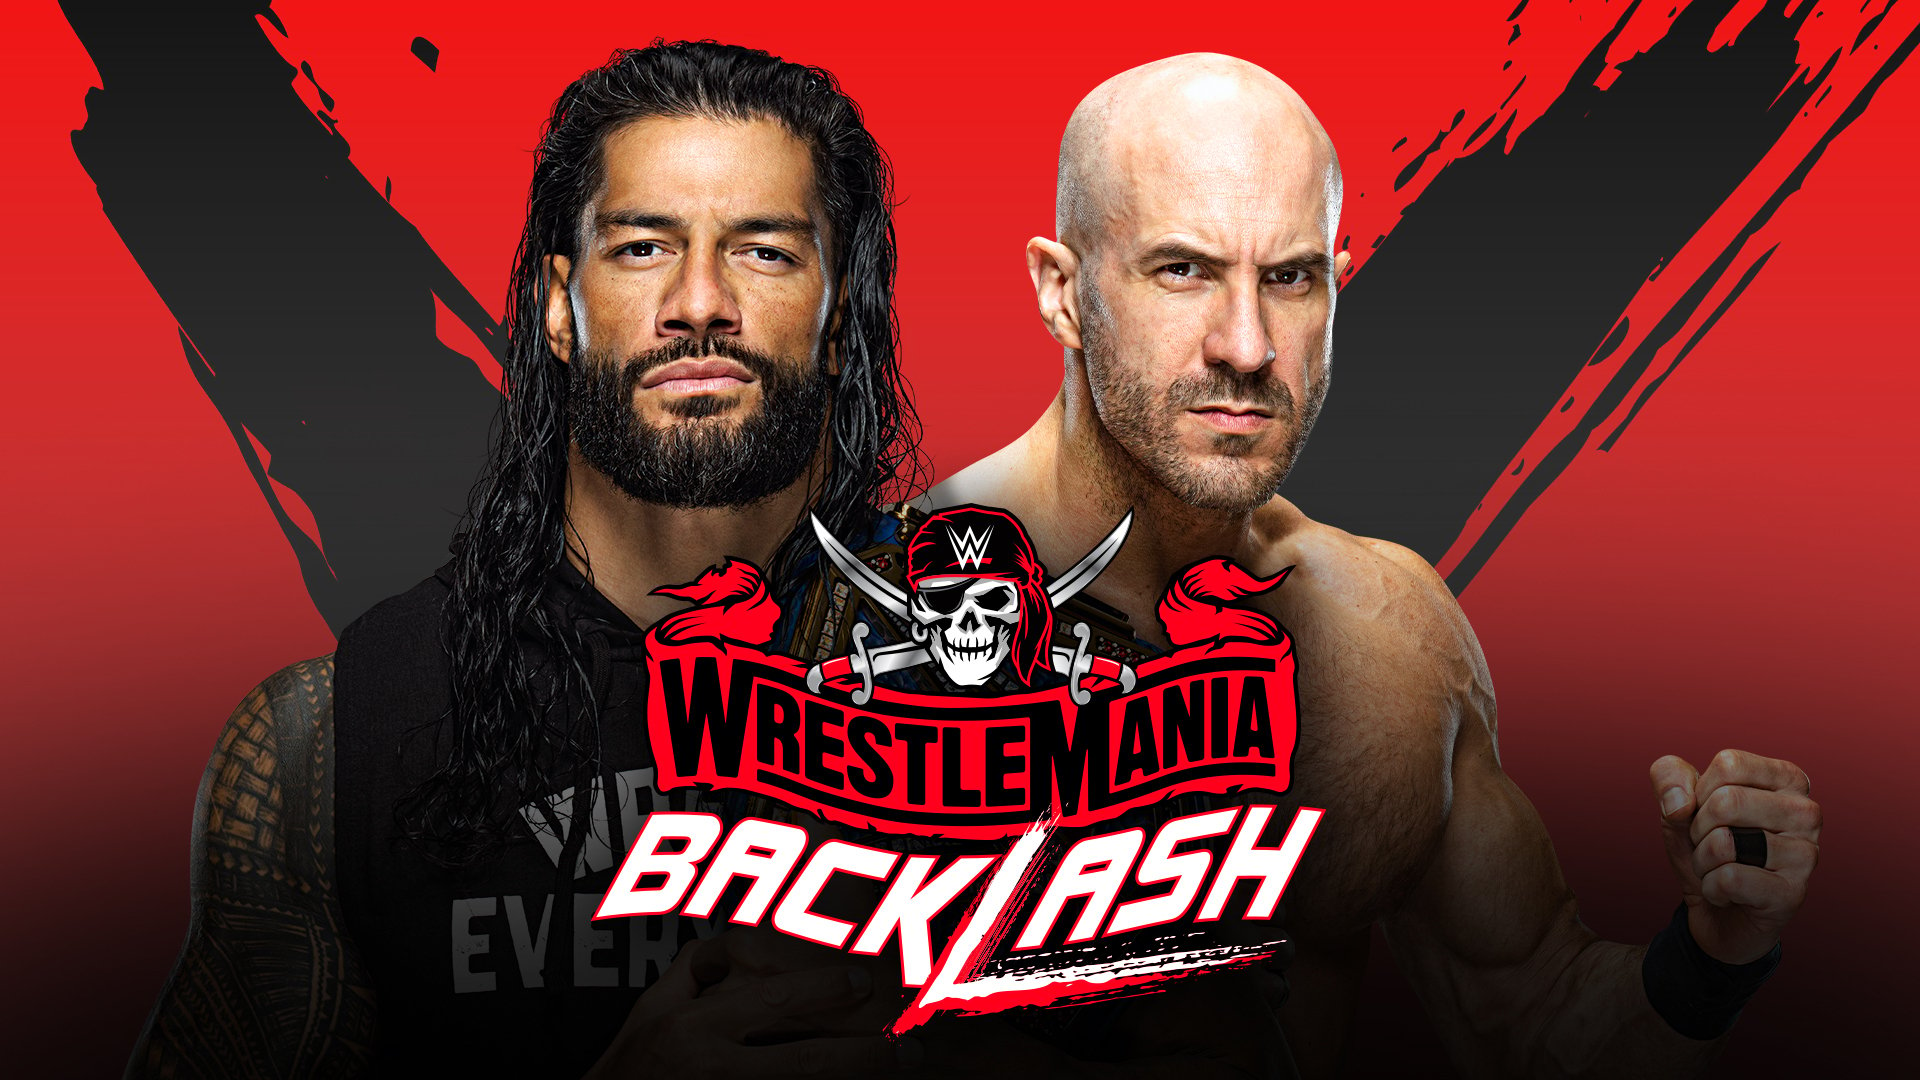 WWE WrestleMania Backlash preview: UK start time, matches, live stream